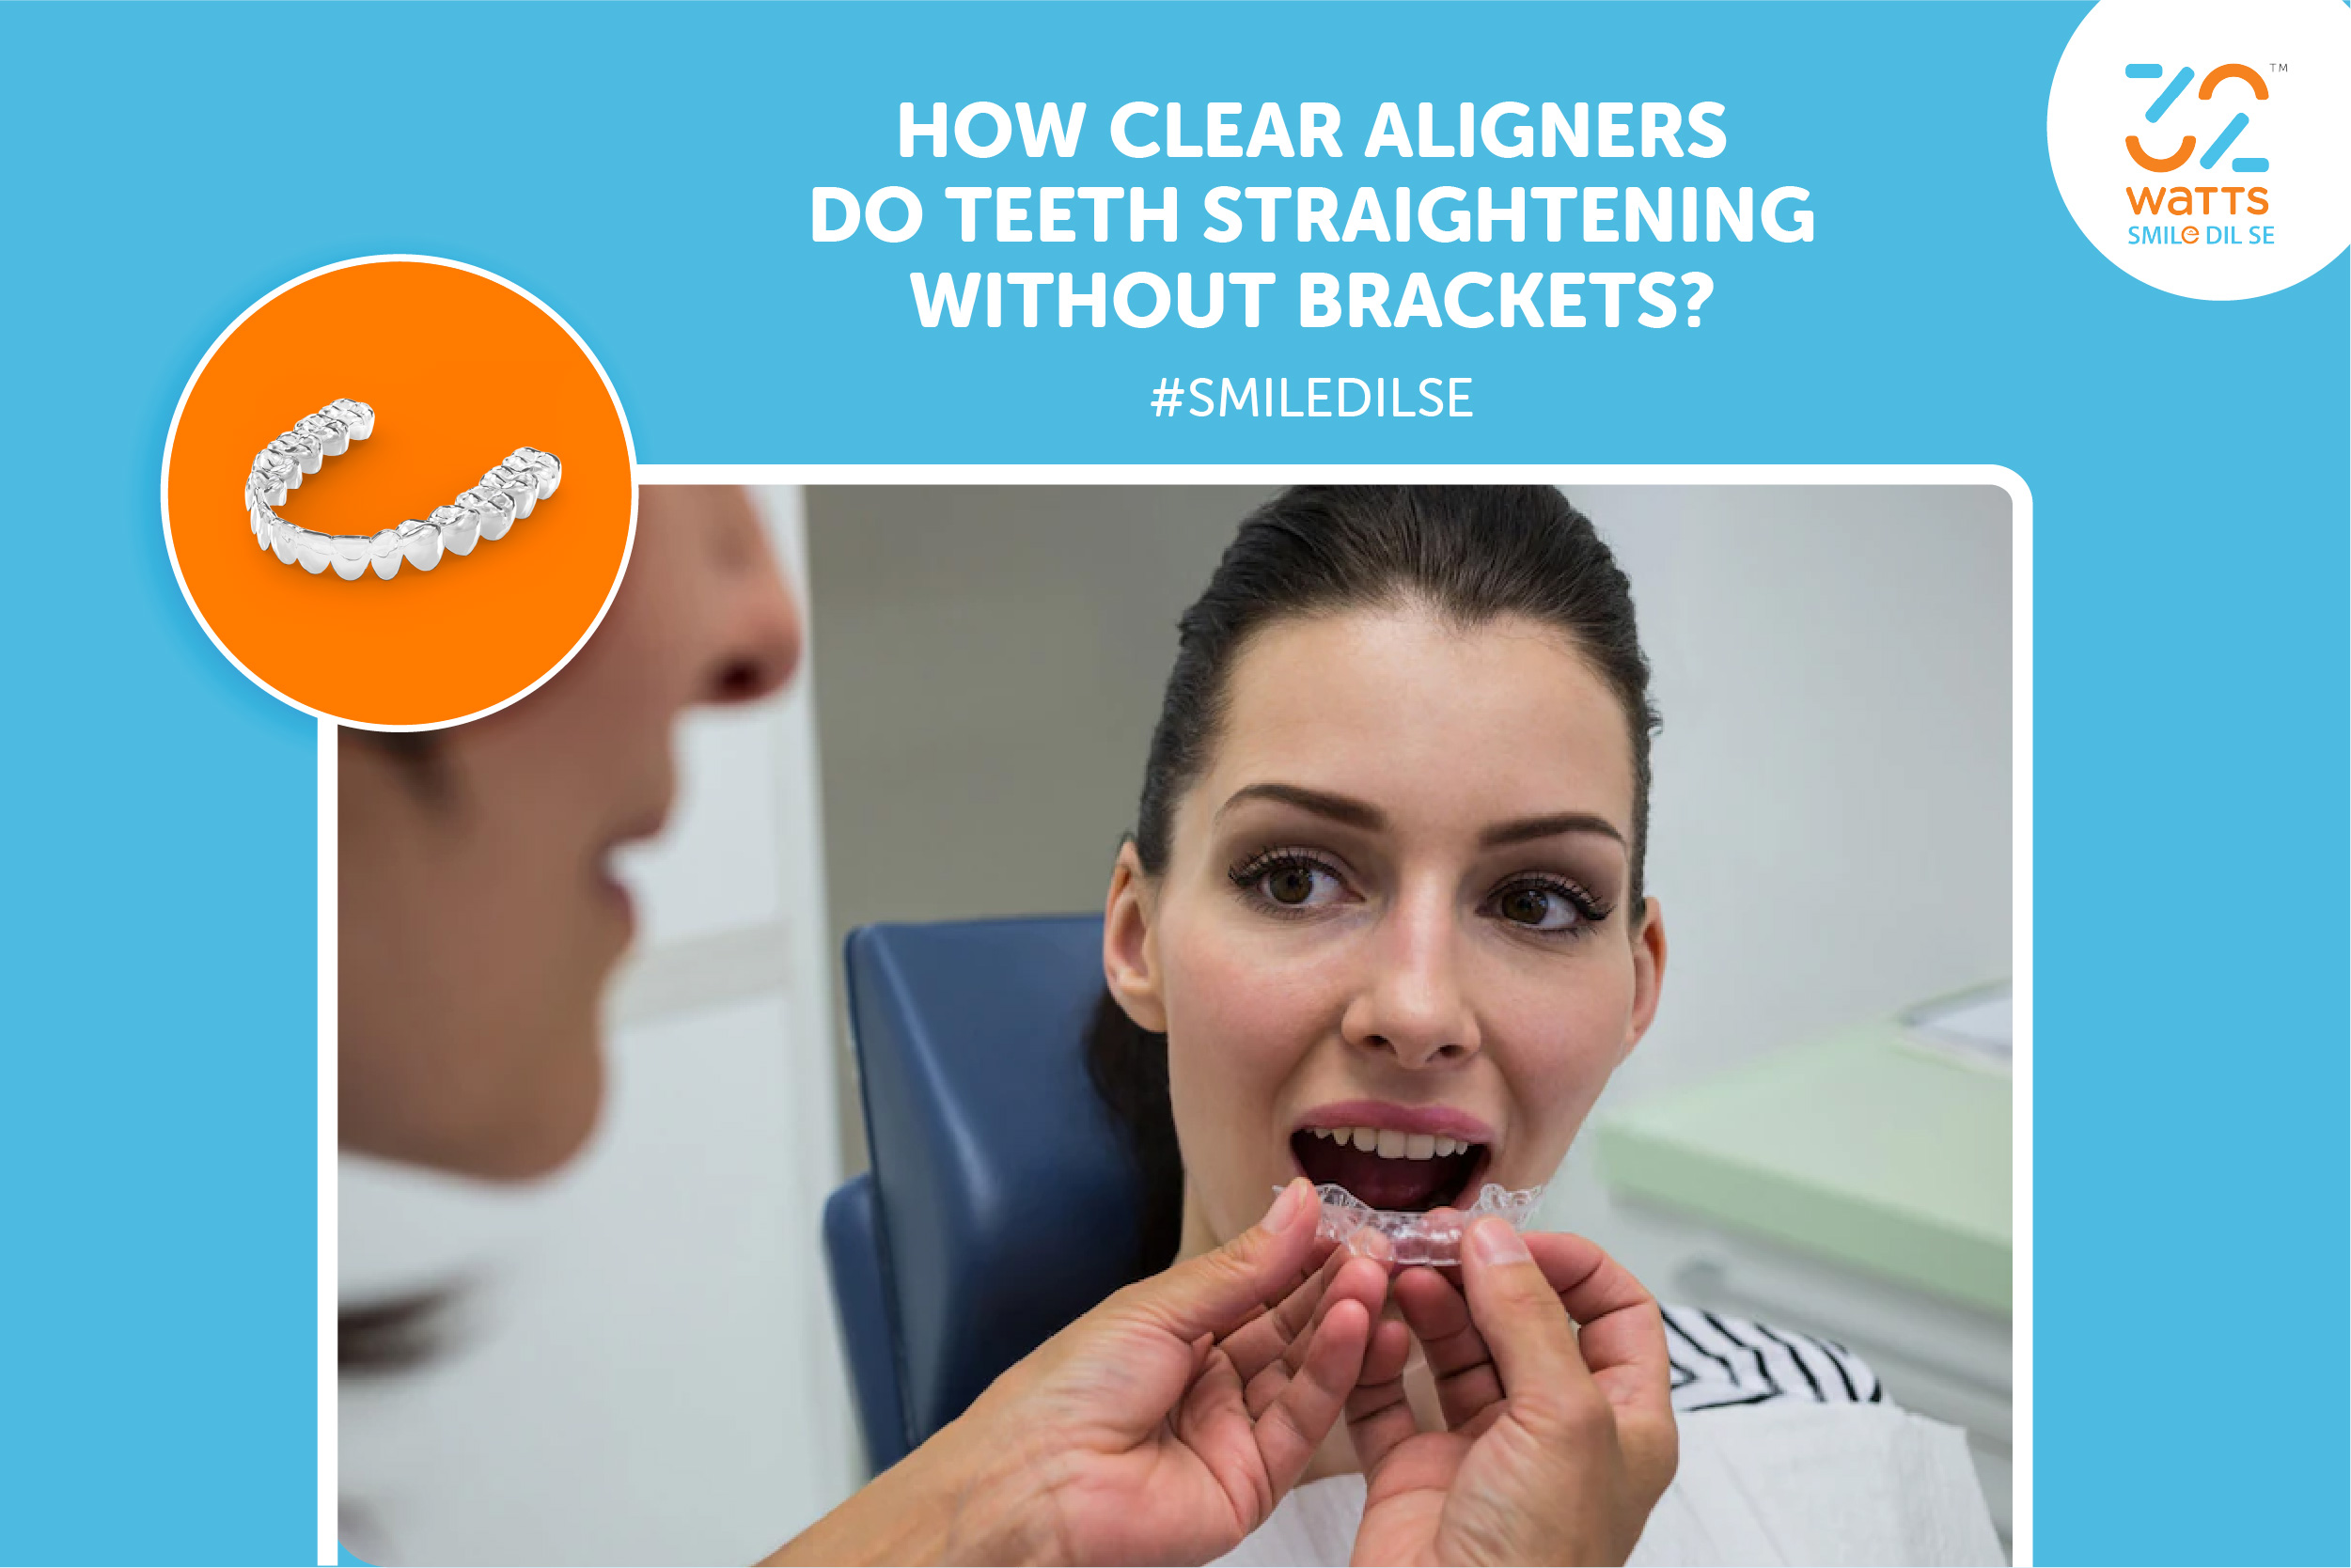 How clear aligners do teeth straightening without brackets?